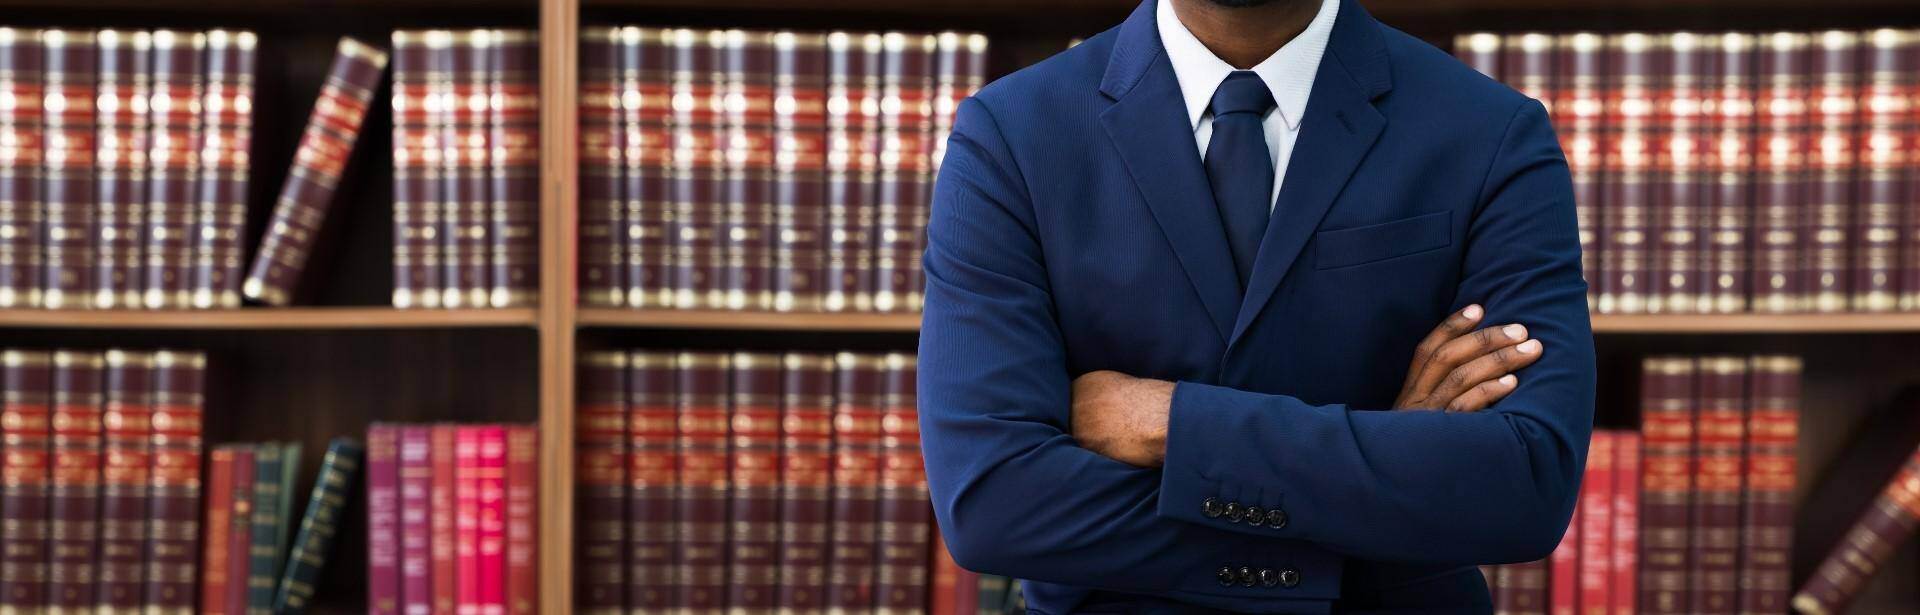 A black lawyer standing in front of a bookshelf of law book in Gainesville, Georgia